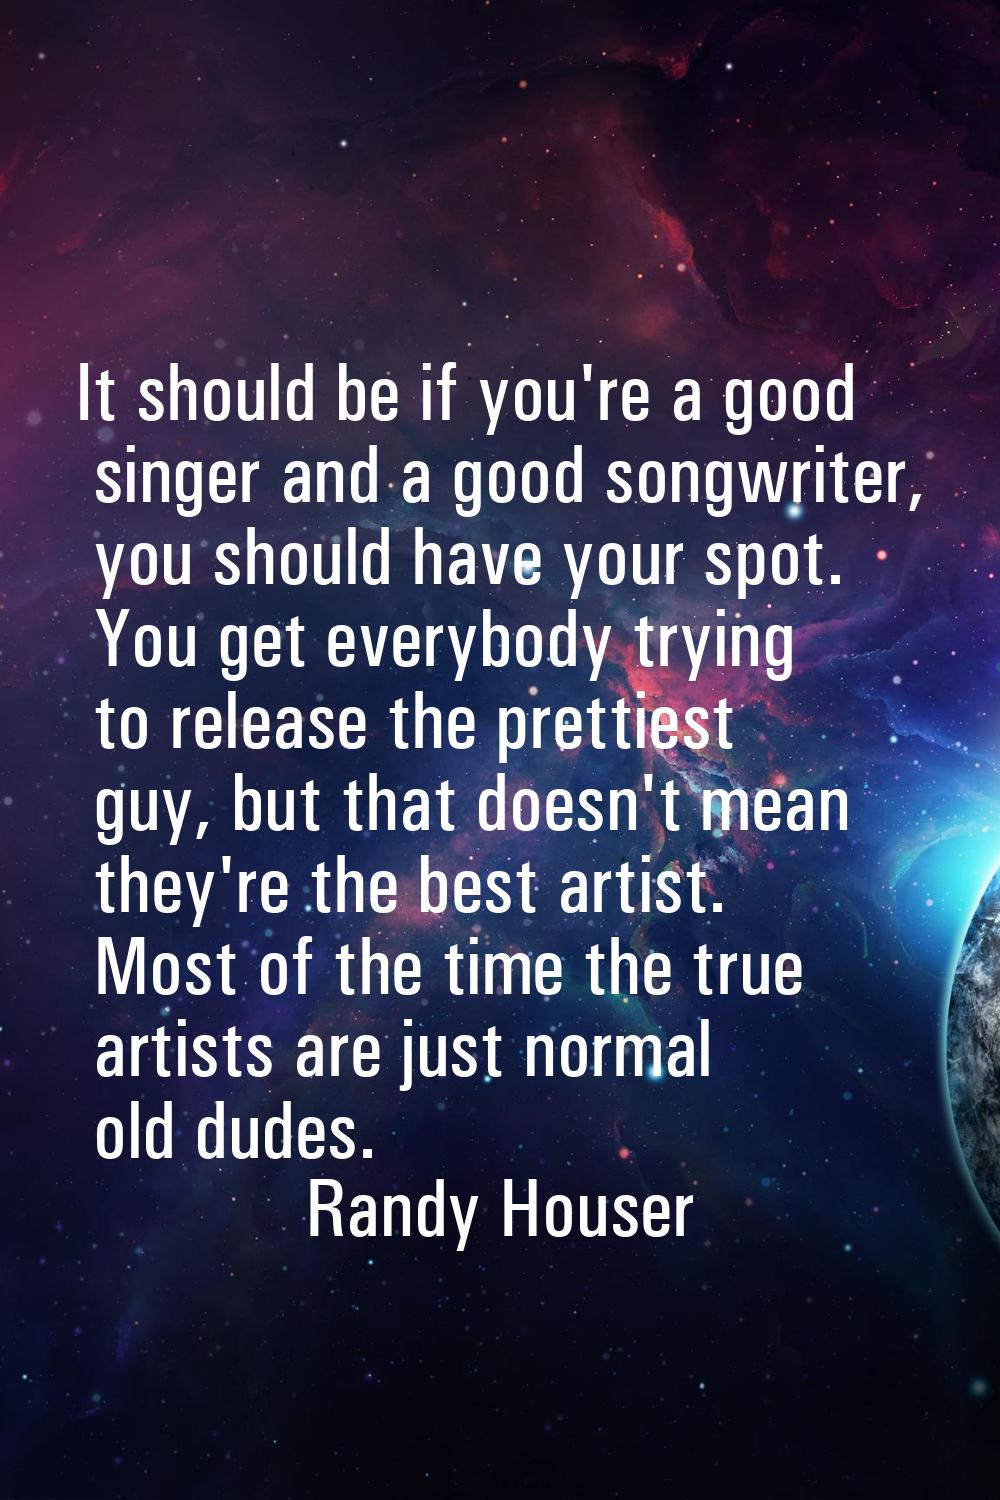 It should be if you're a good singer and a good songwriter, you should have your spot. You get ever